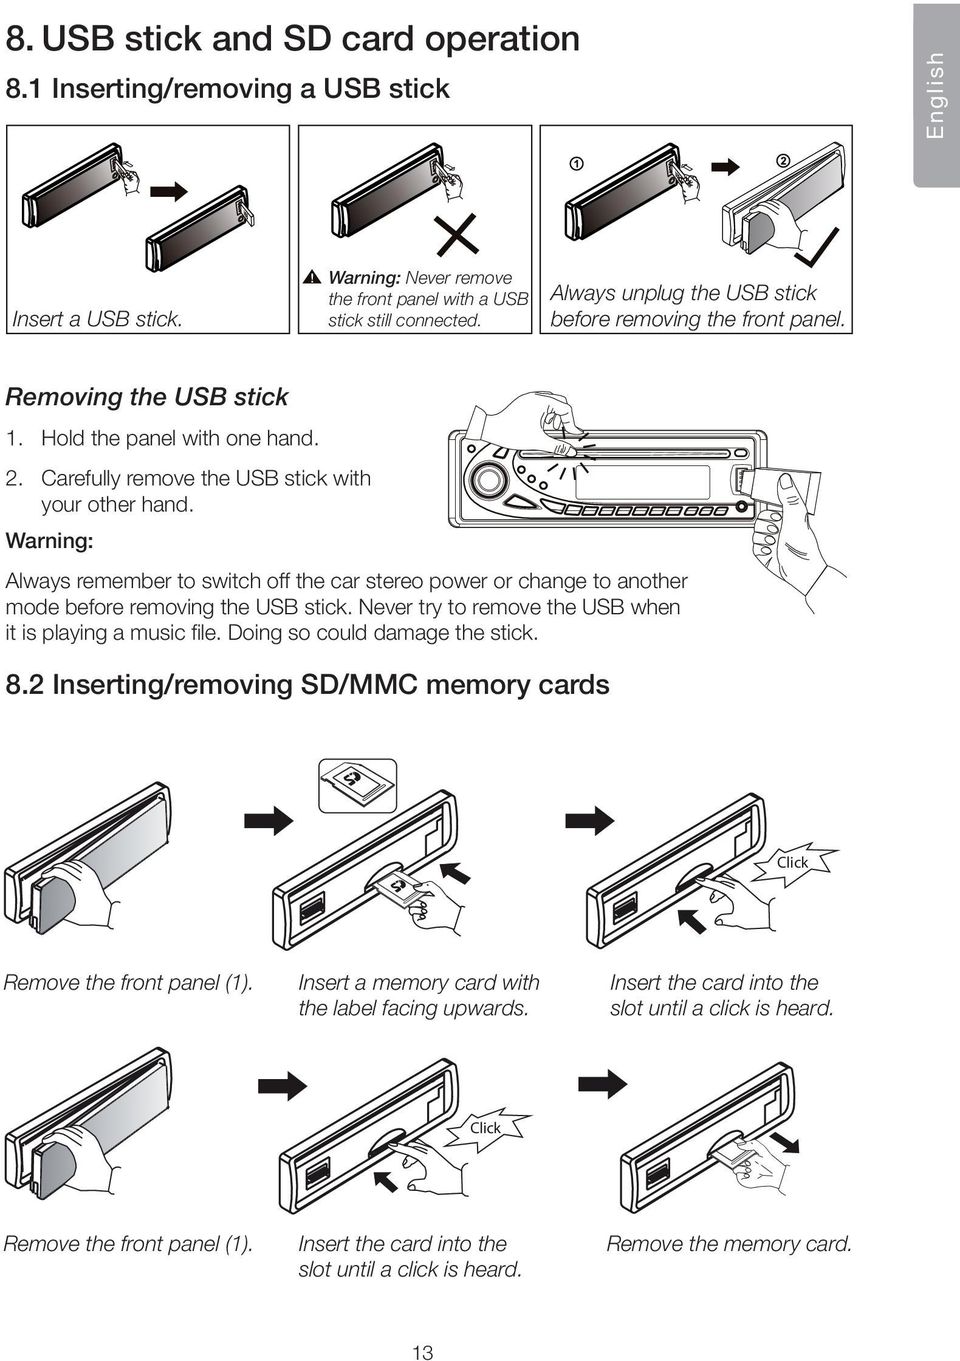 Warning: Never remove the front panel with a USB stick still connected. Always unplug the USB 2stick before removing the front panel. 2 Removing the USB stick 1. Hold the panel with one hand. 2. Carefully remove the USB stick with your other hand.